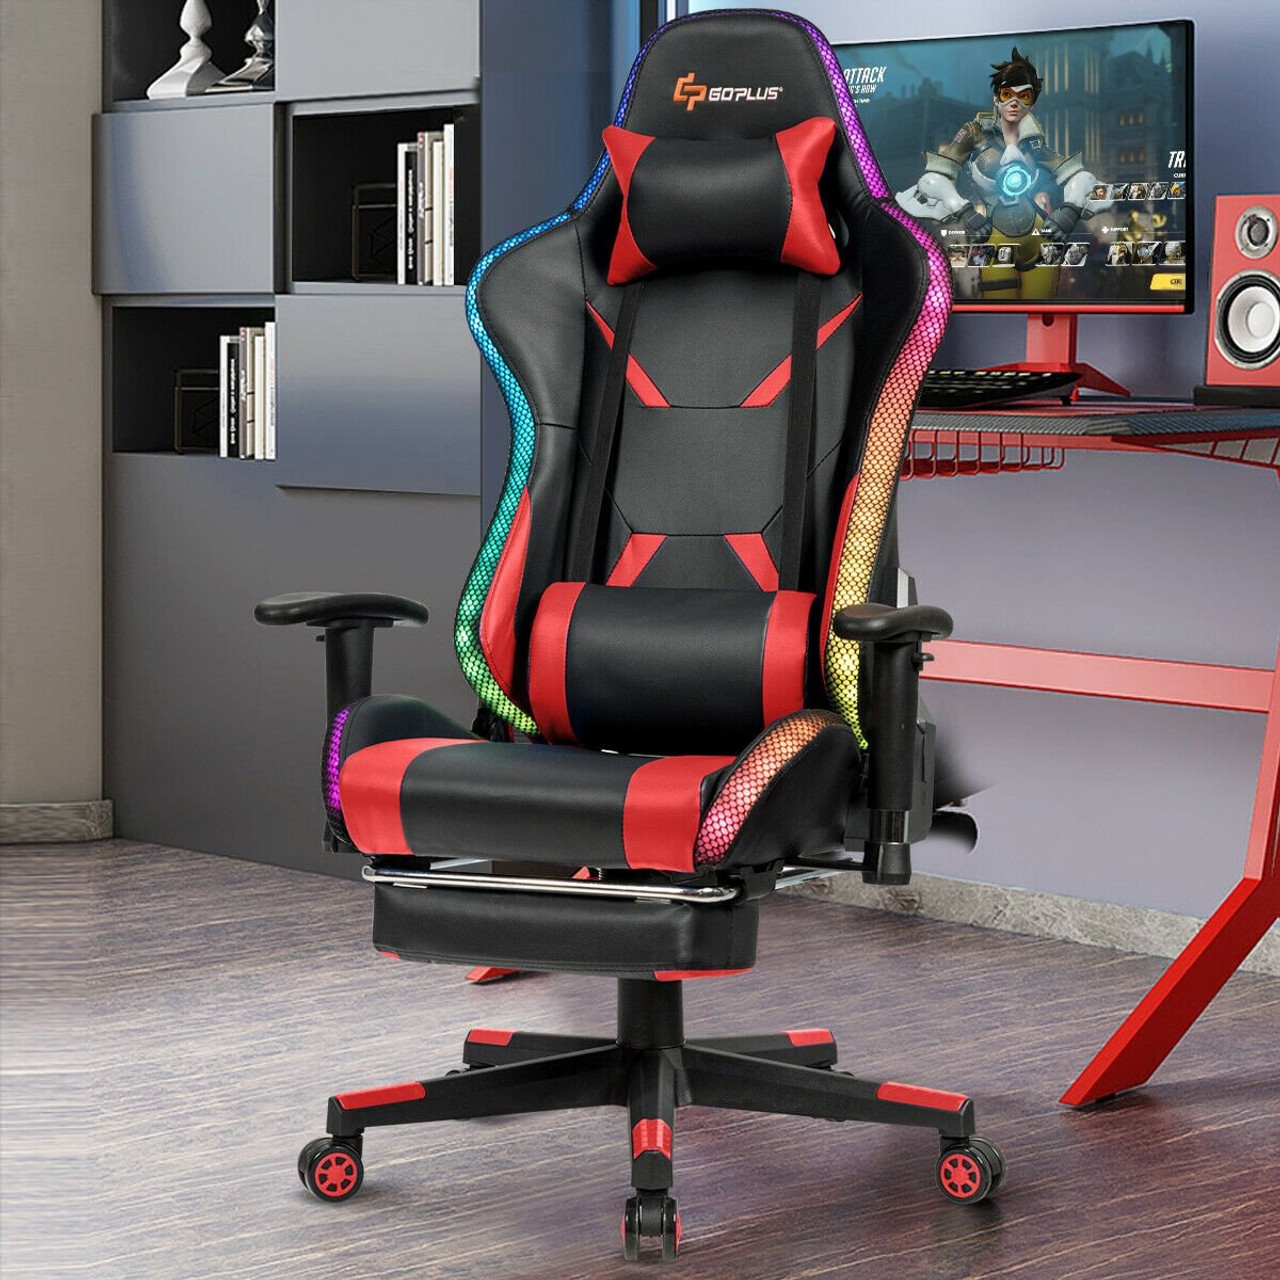 massage racing gaming chair chair with rgb led lightsred hw64154re